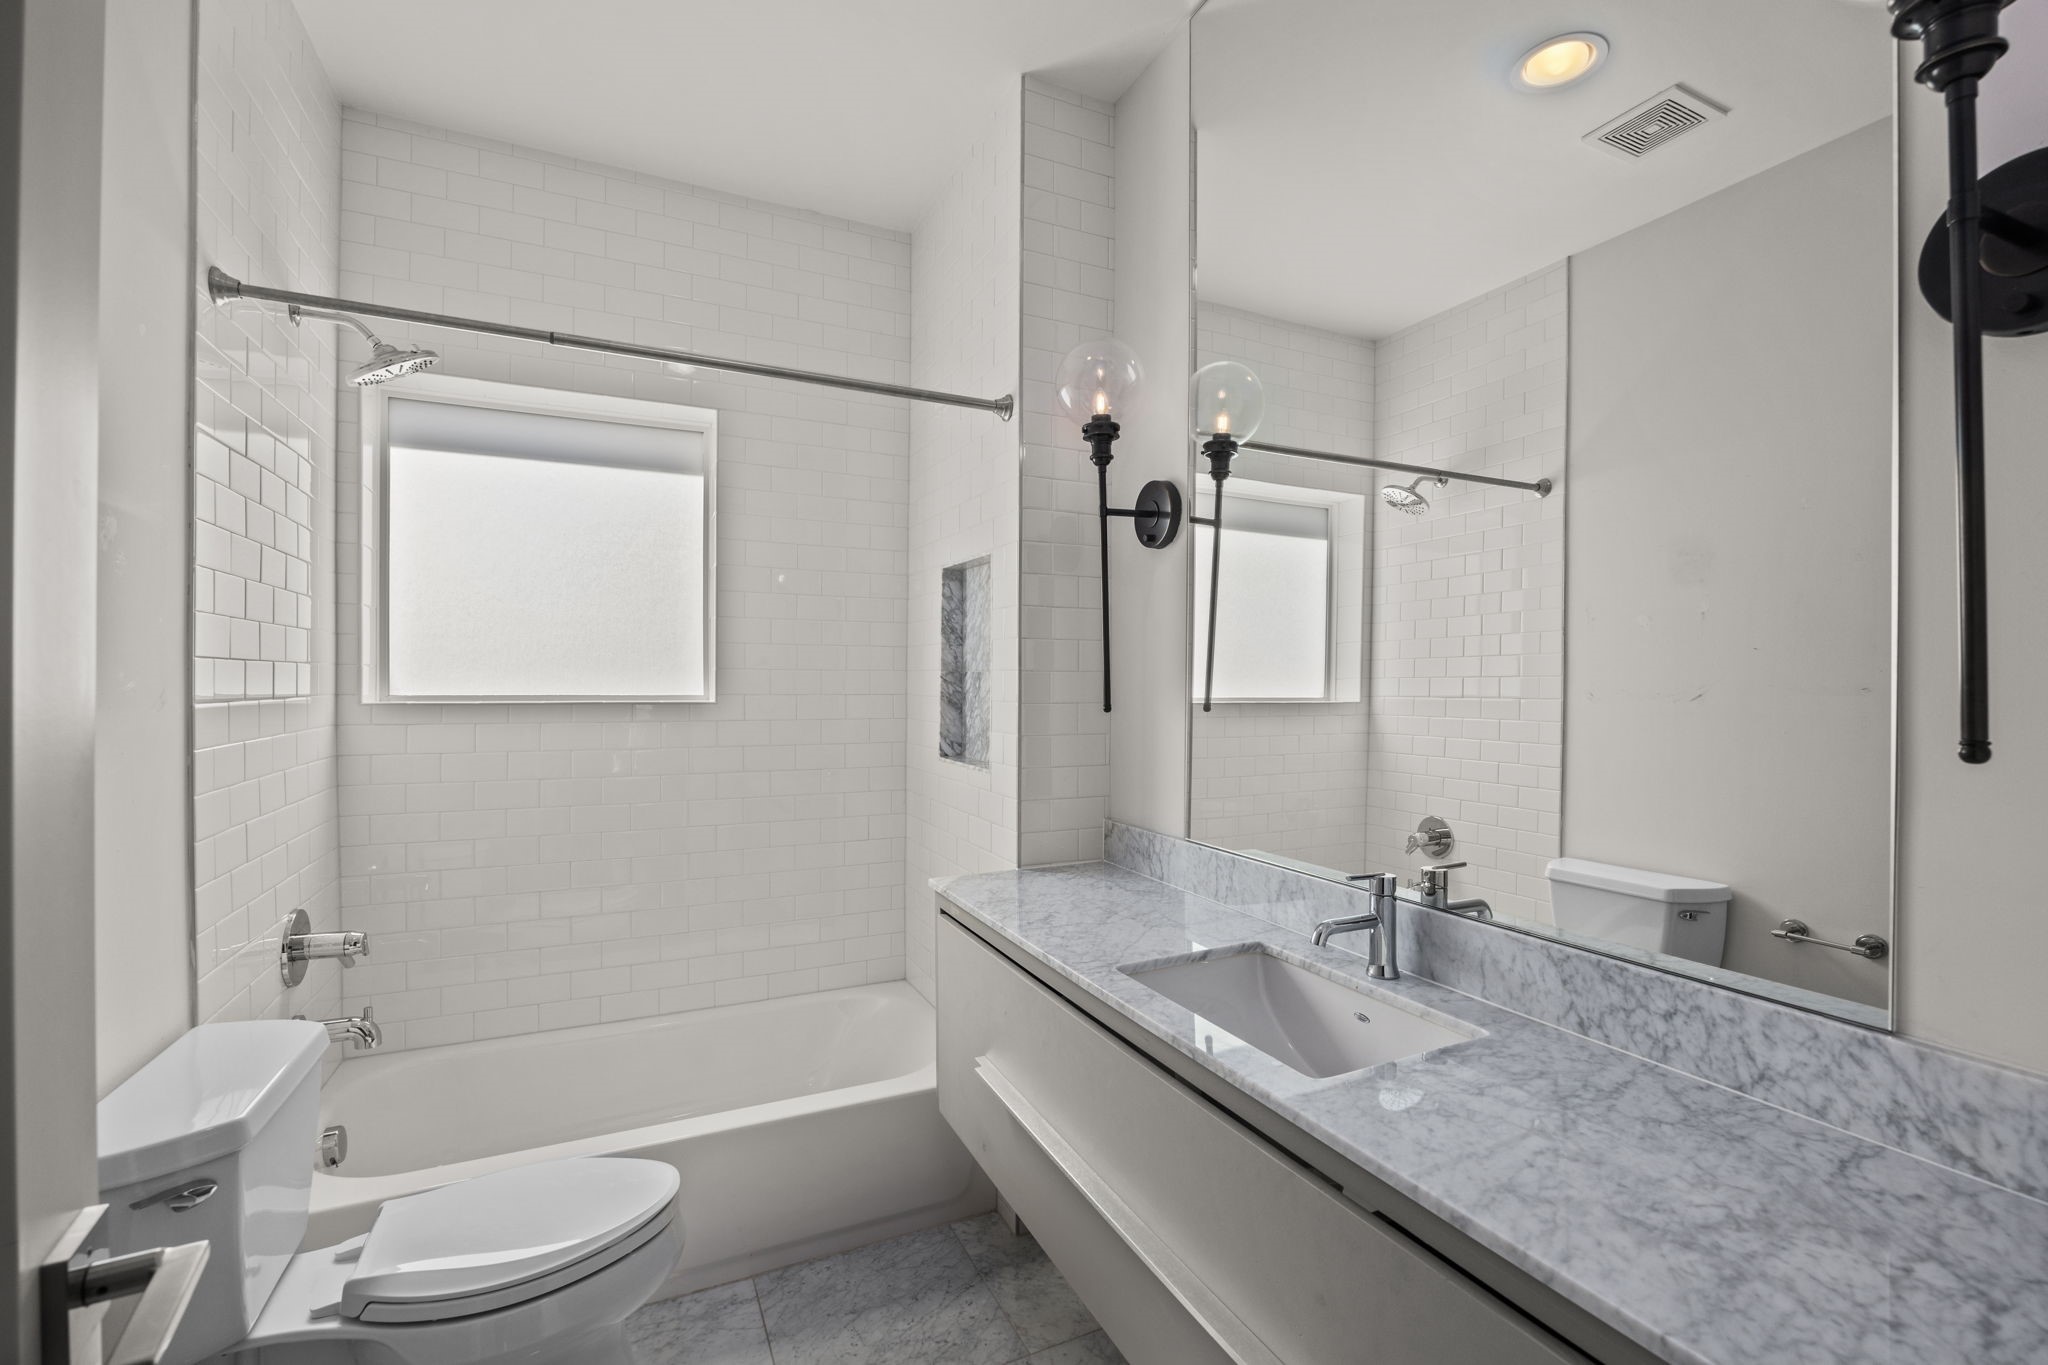 Full secondary bathroom is also located upstairs.